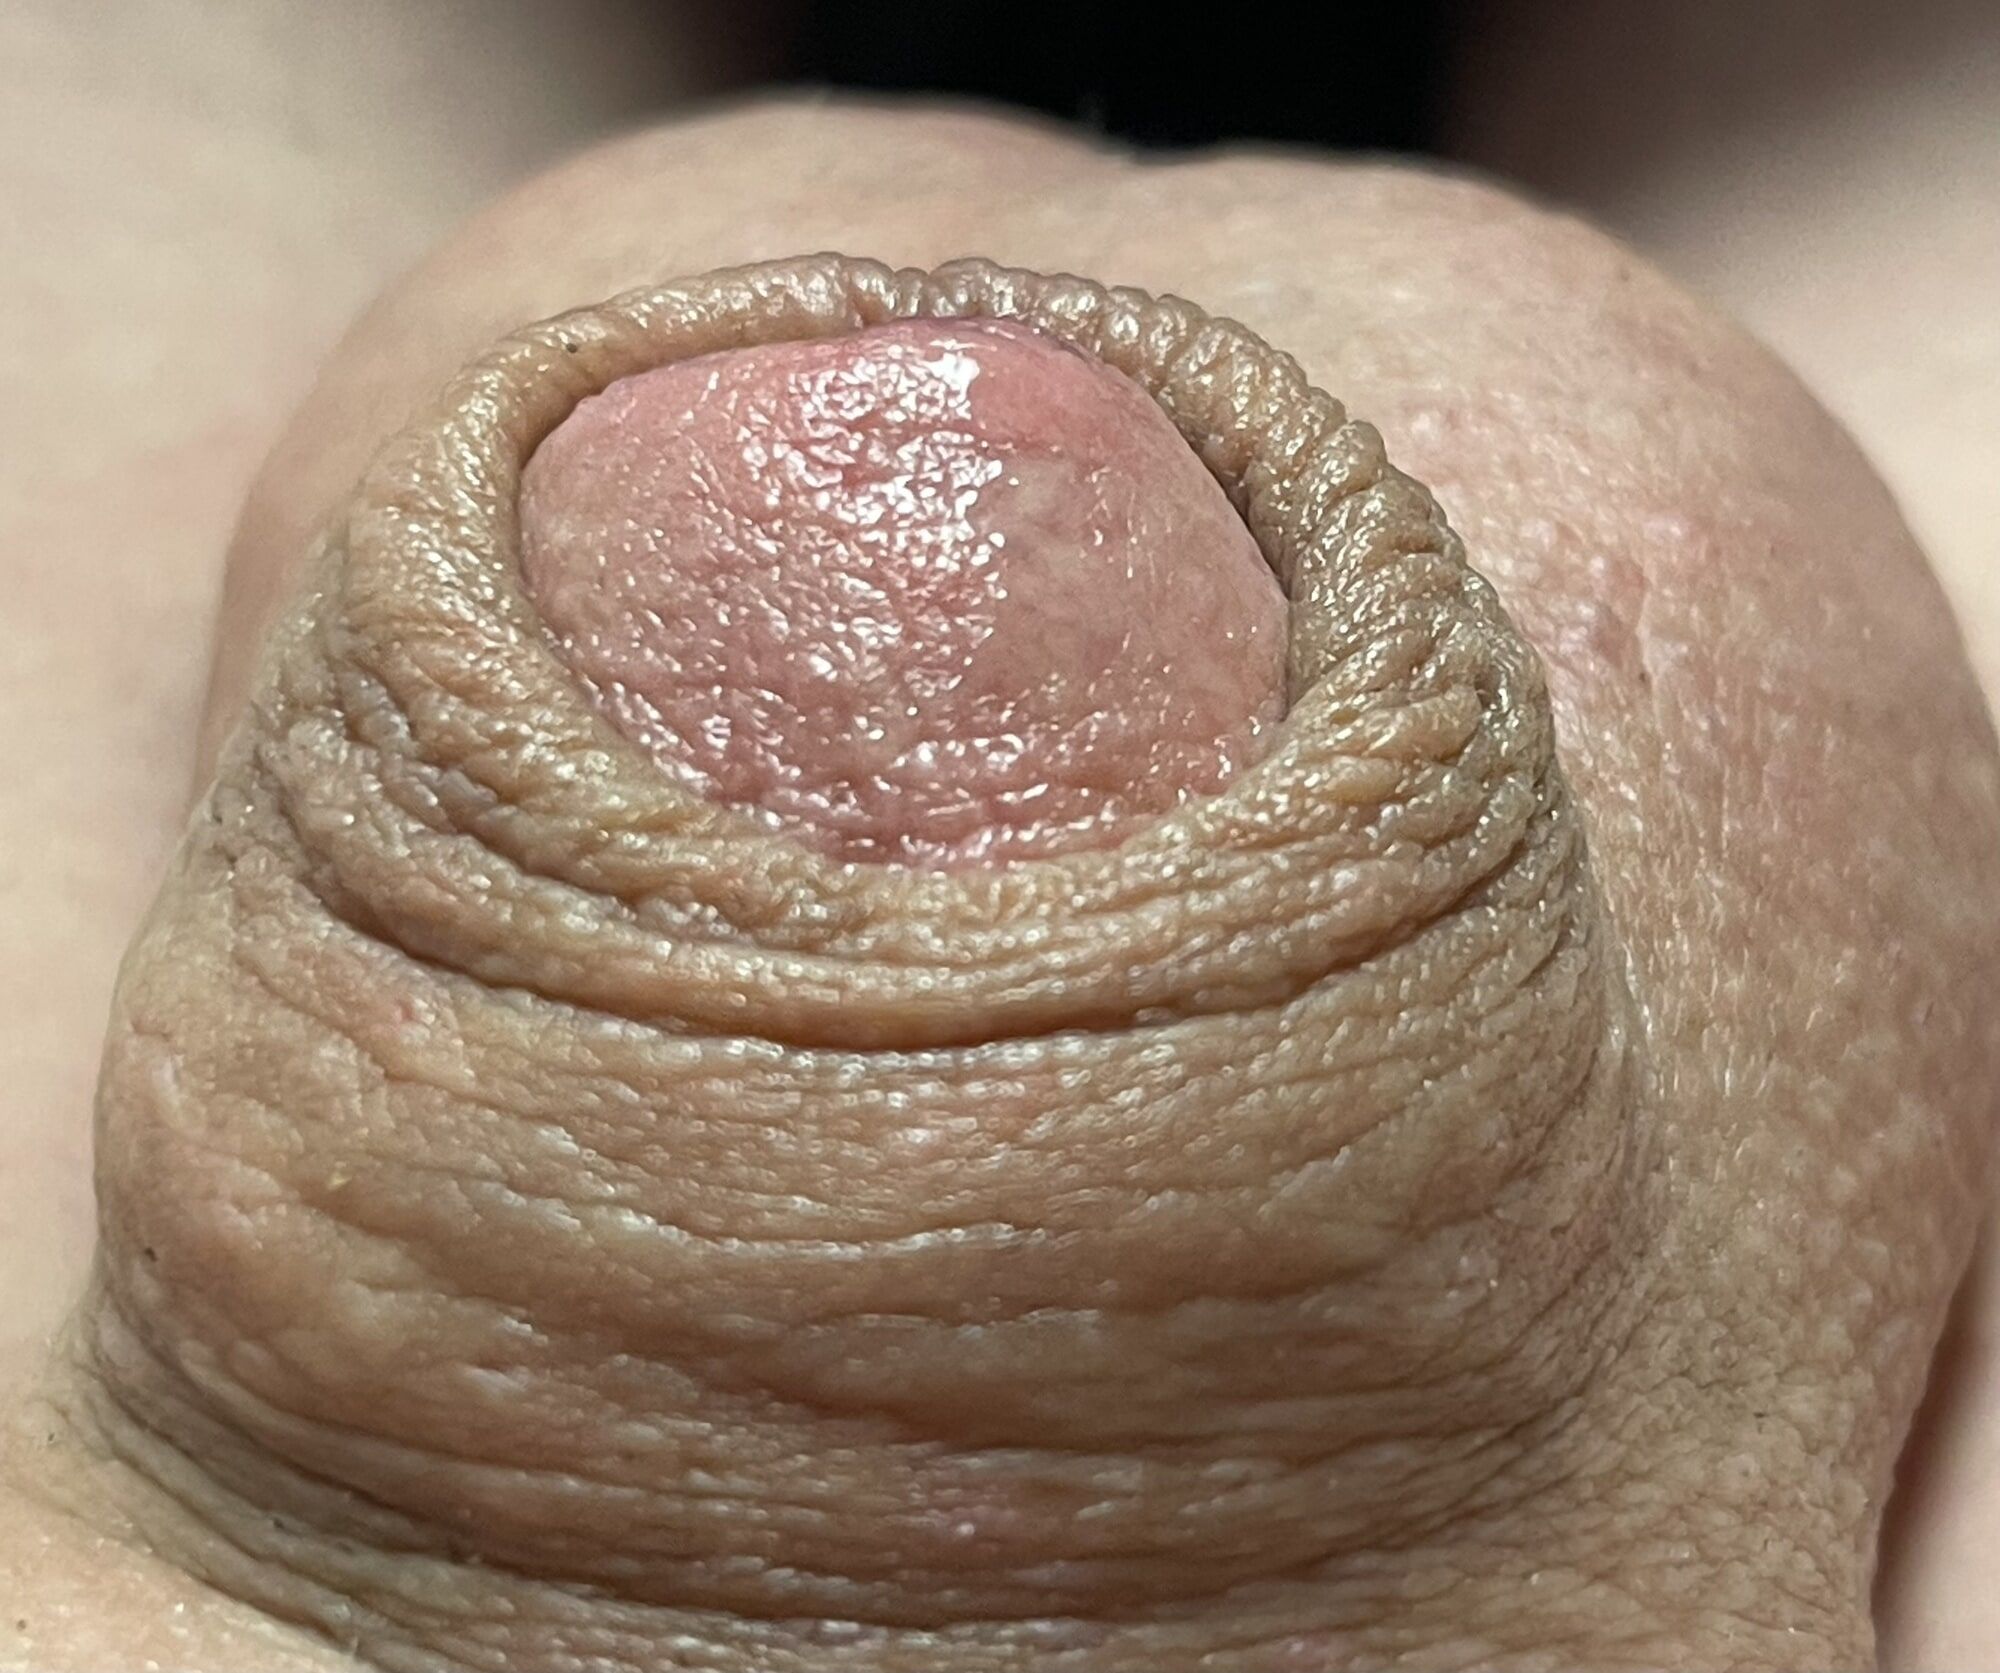 Micropenis close up #2